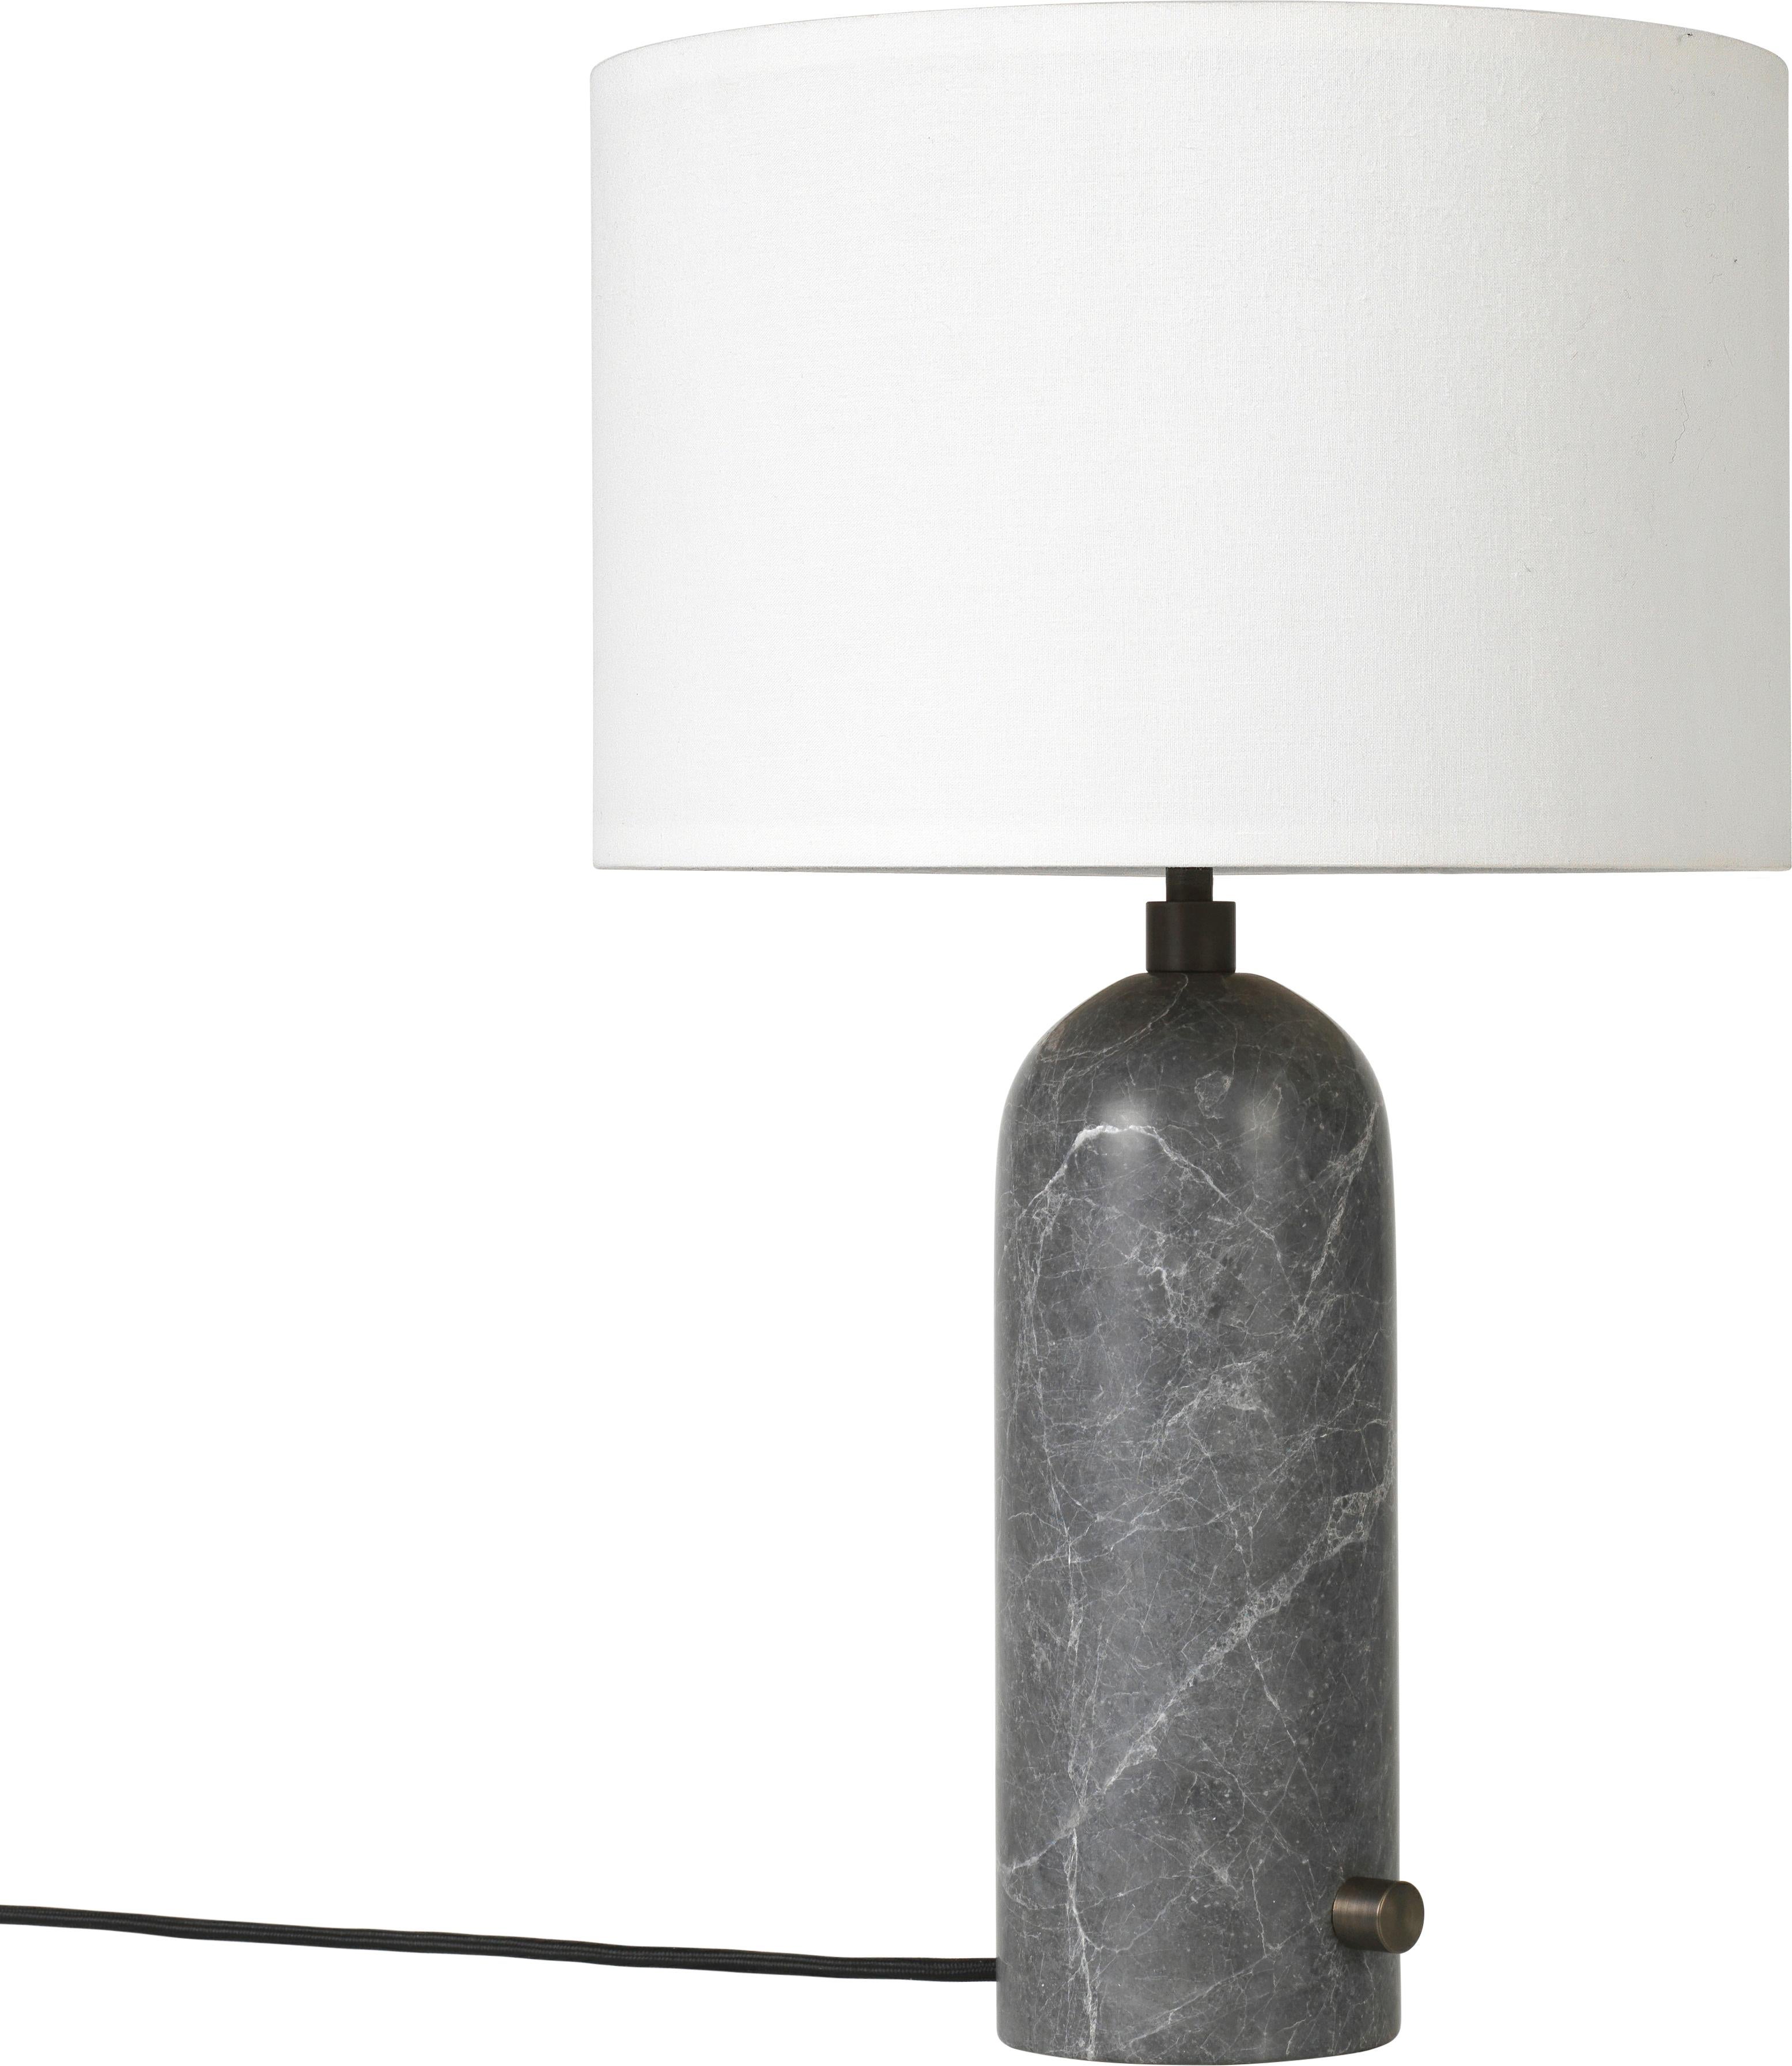 Large 'Gravity' Marble Table Lamp by Space Copenhagen for Gubi in White For Sale 2